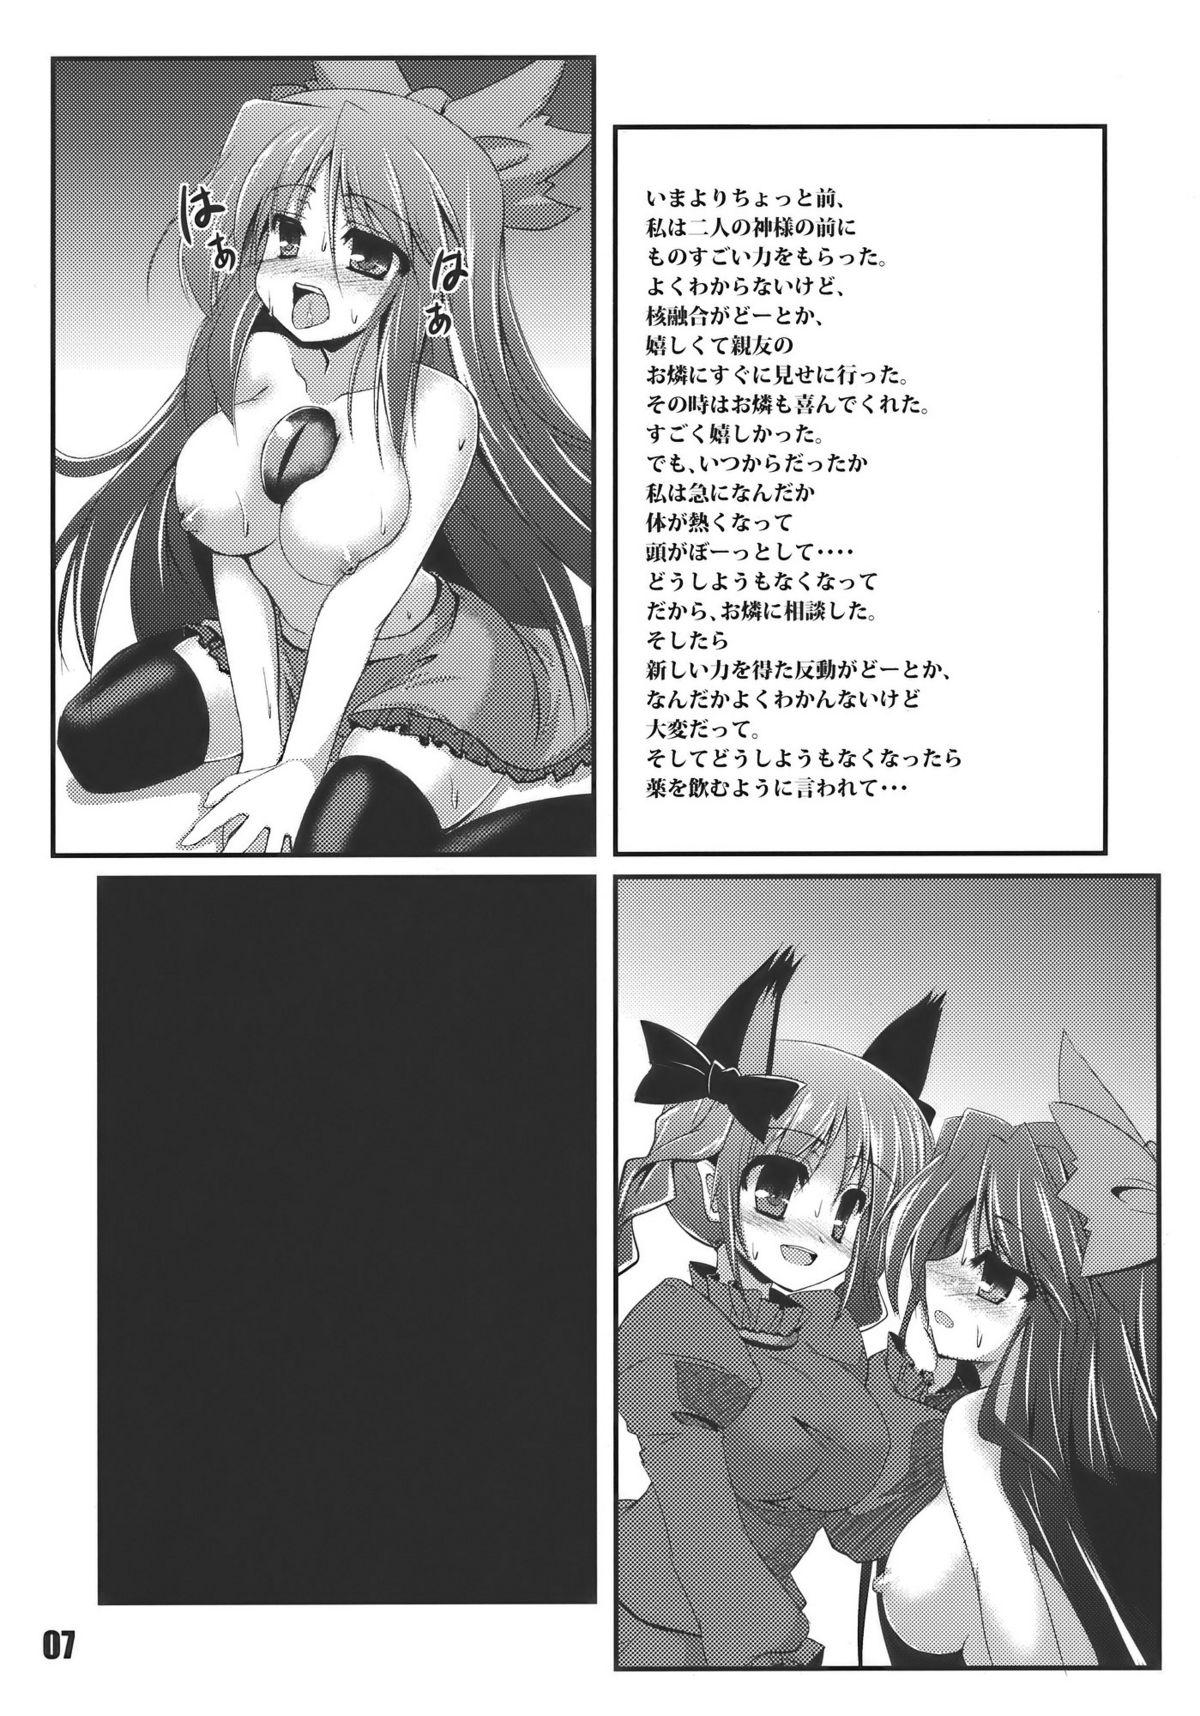 Penis Febrile Disease - Touhou project Girlfriend - Page 7